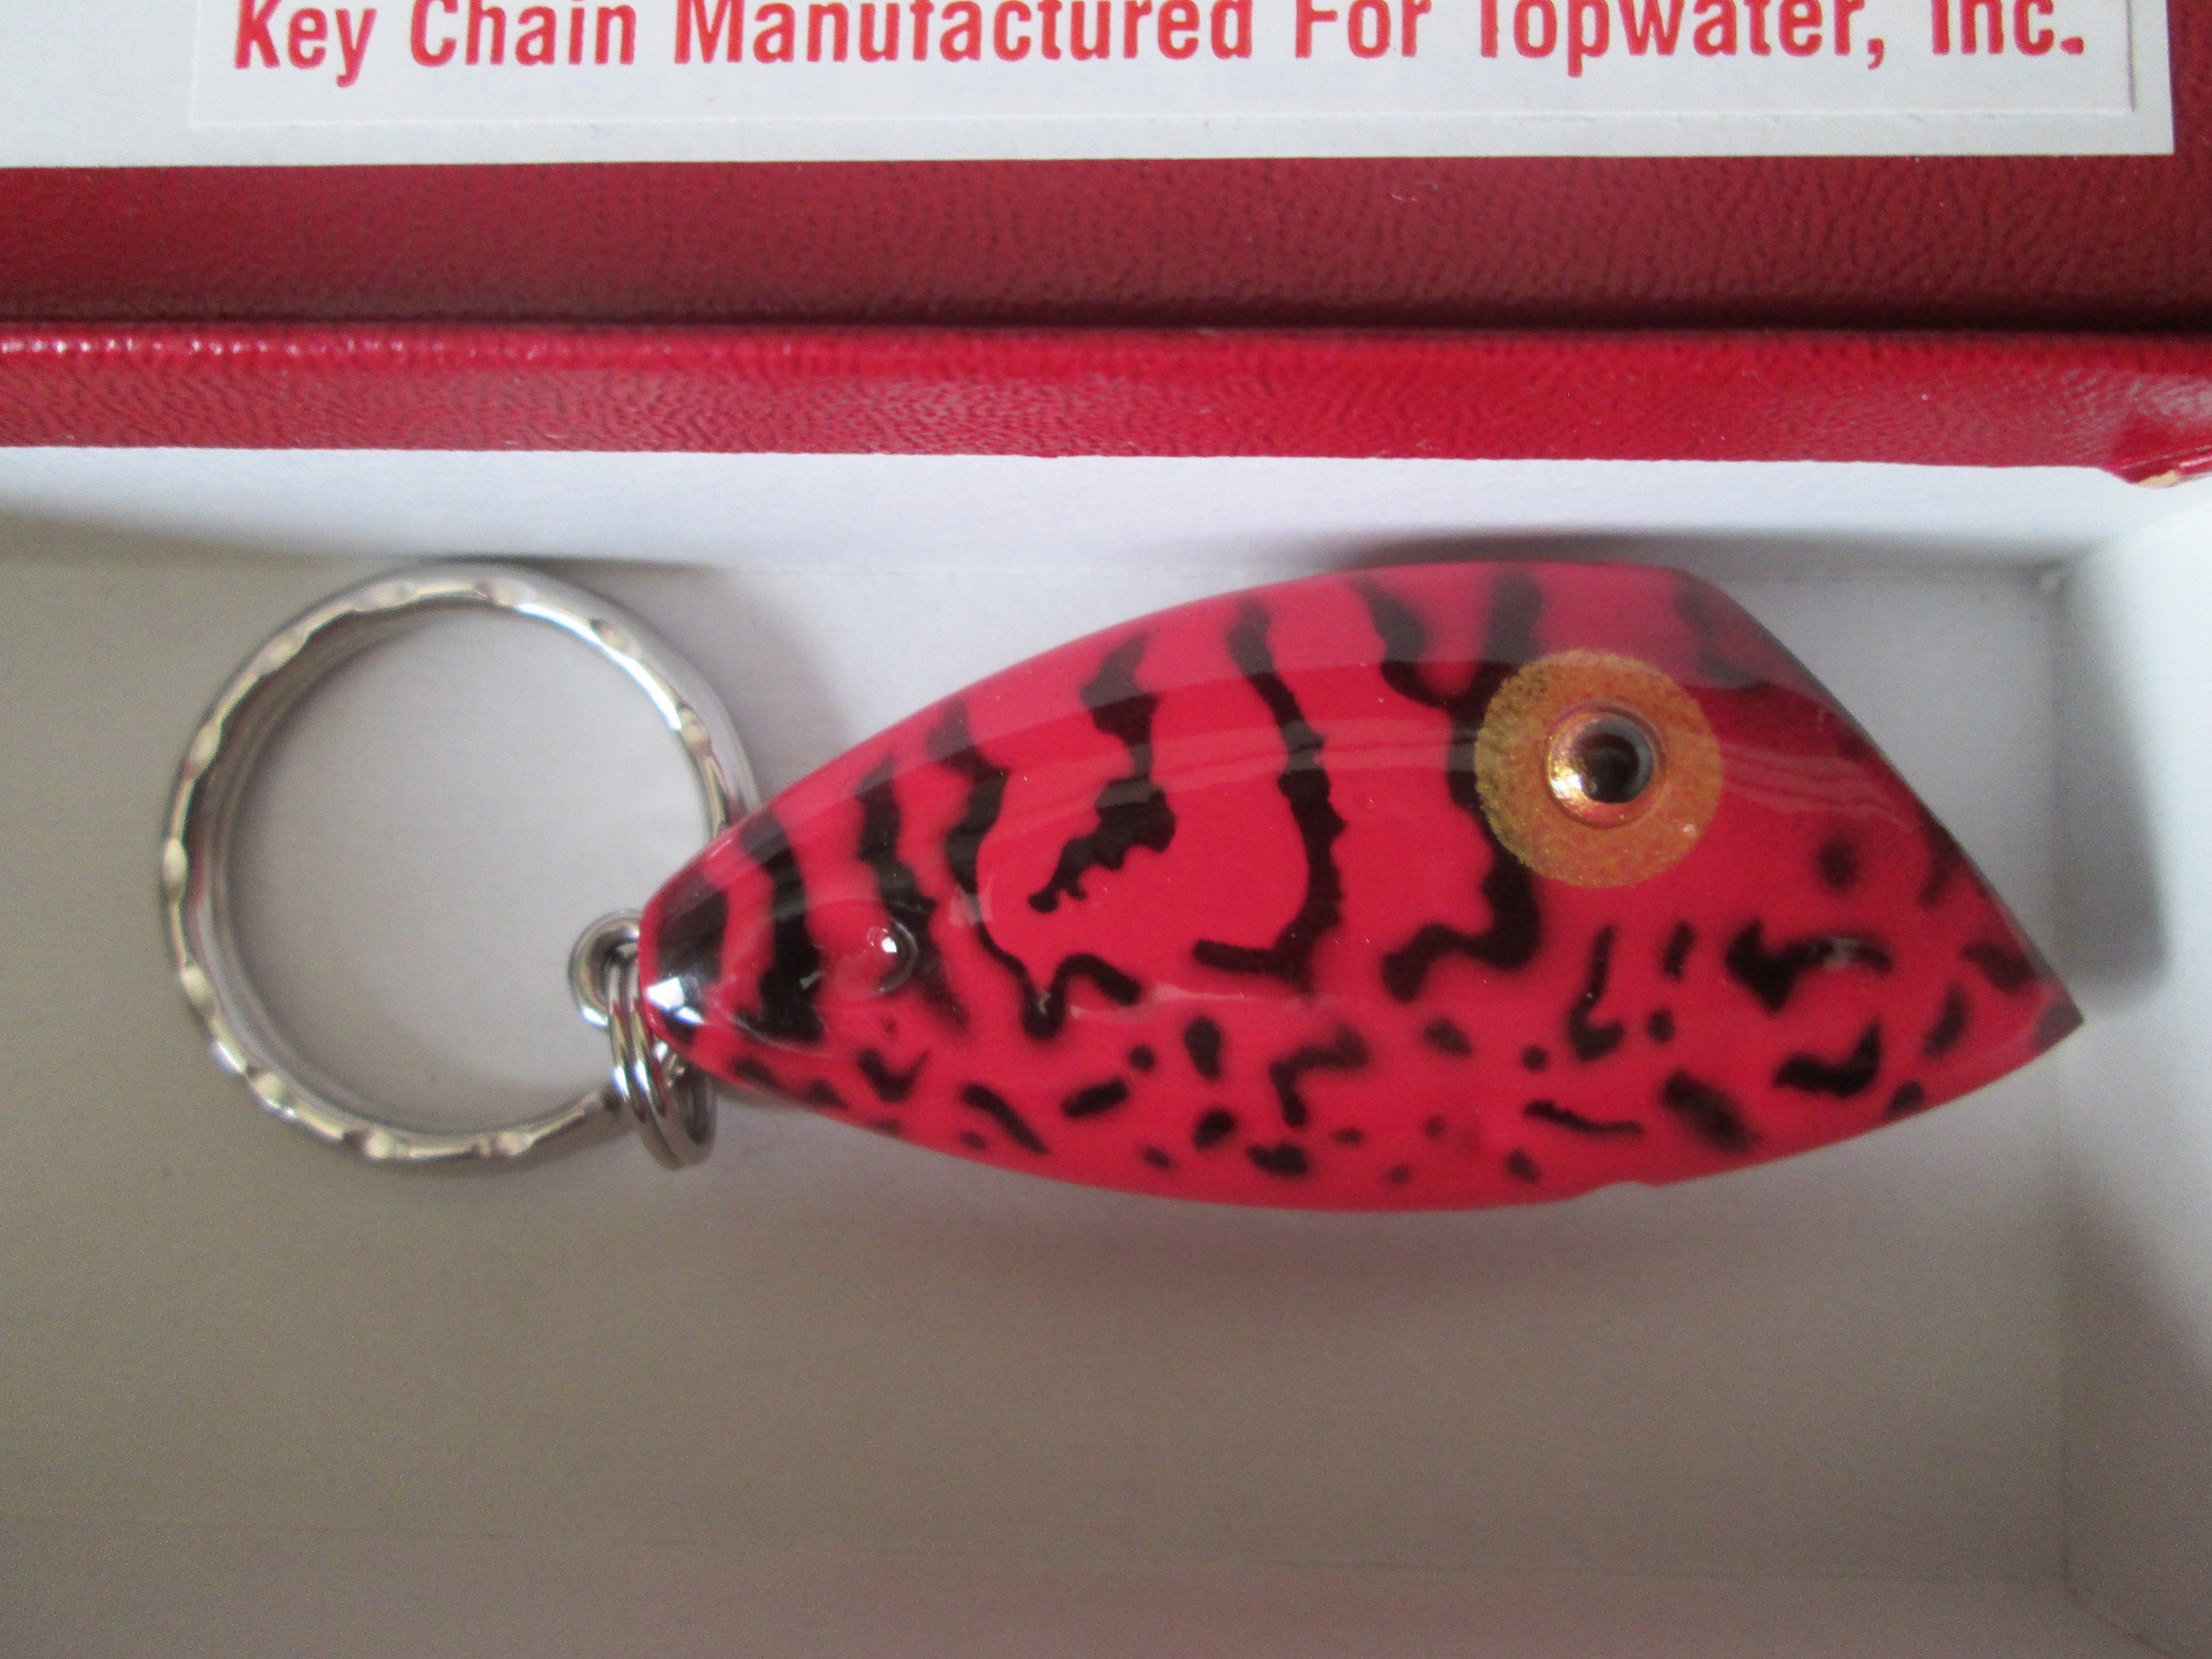 Pico Pink Fishing Lure Keychain in Box 